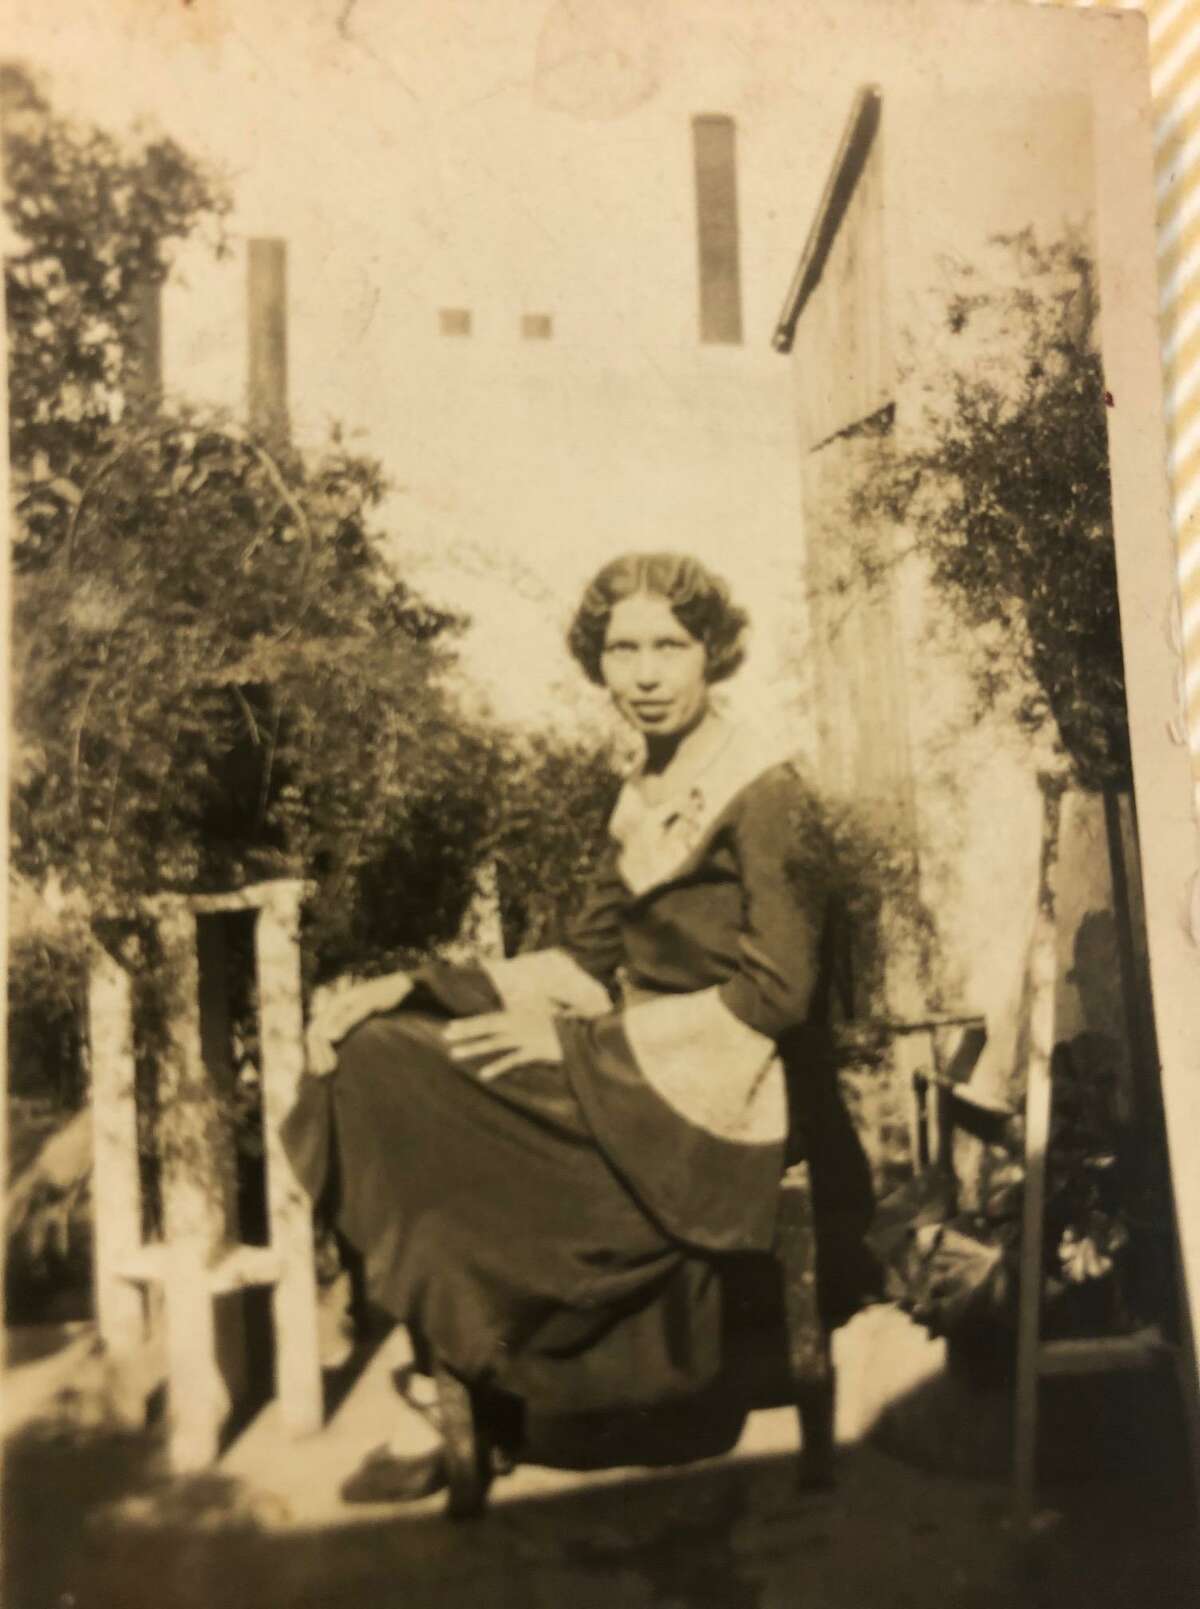 Lucia Rodriguez De Leon operated the Cinderella Beauty Shop from the house at 836 S. Laredo St., where she raised four children as a widow. She lived from 1909 to 1986 and still owned the house just west of San Pedro Creek when she died.